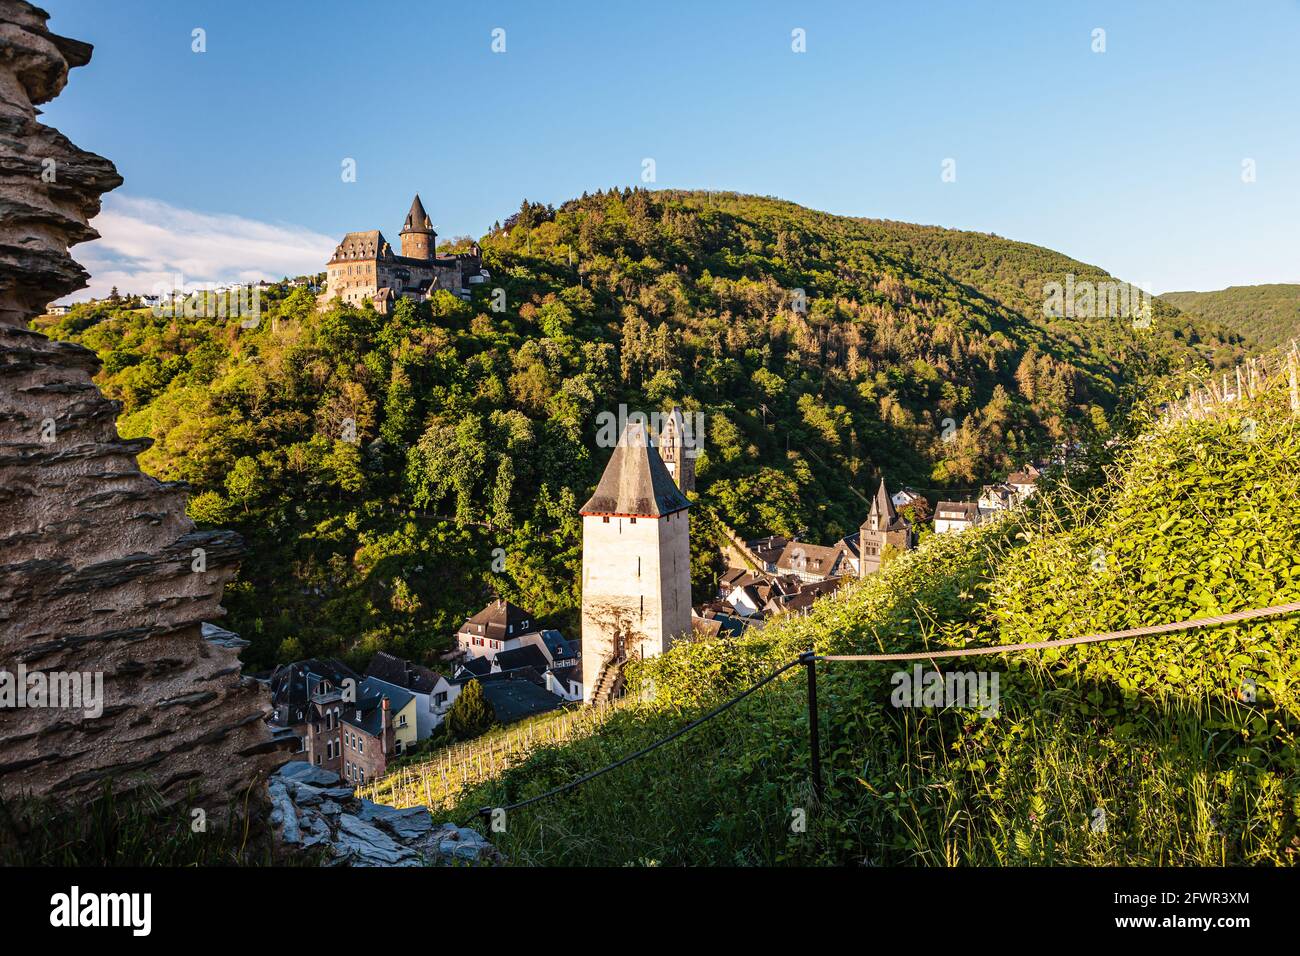 Stahleck castle and historical town wall at dawn, Bacharach, rhine valley, Germany, Europe Stock Photo